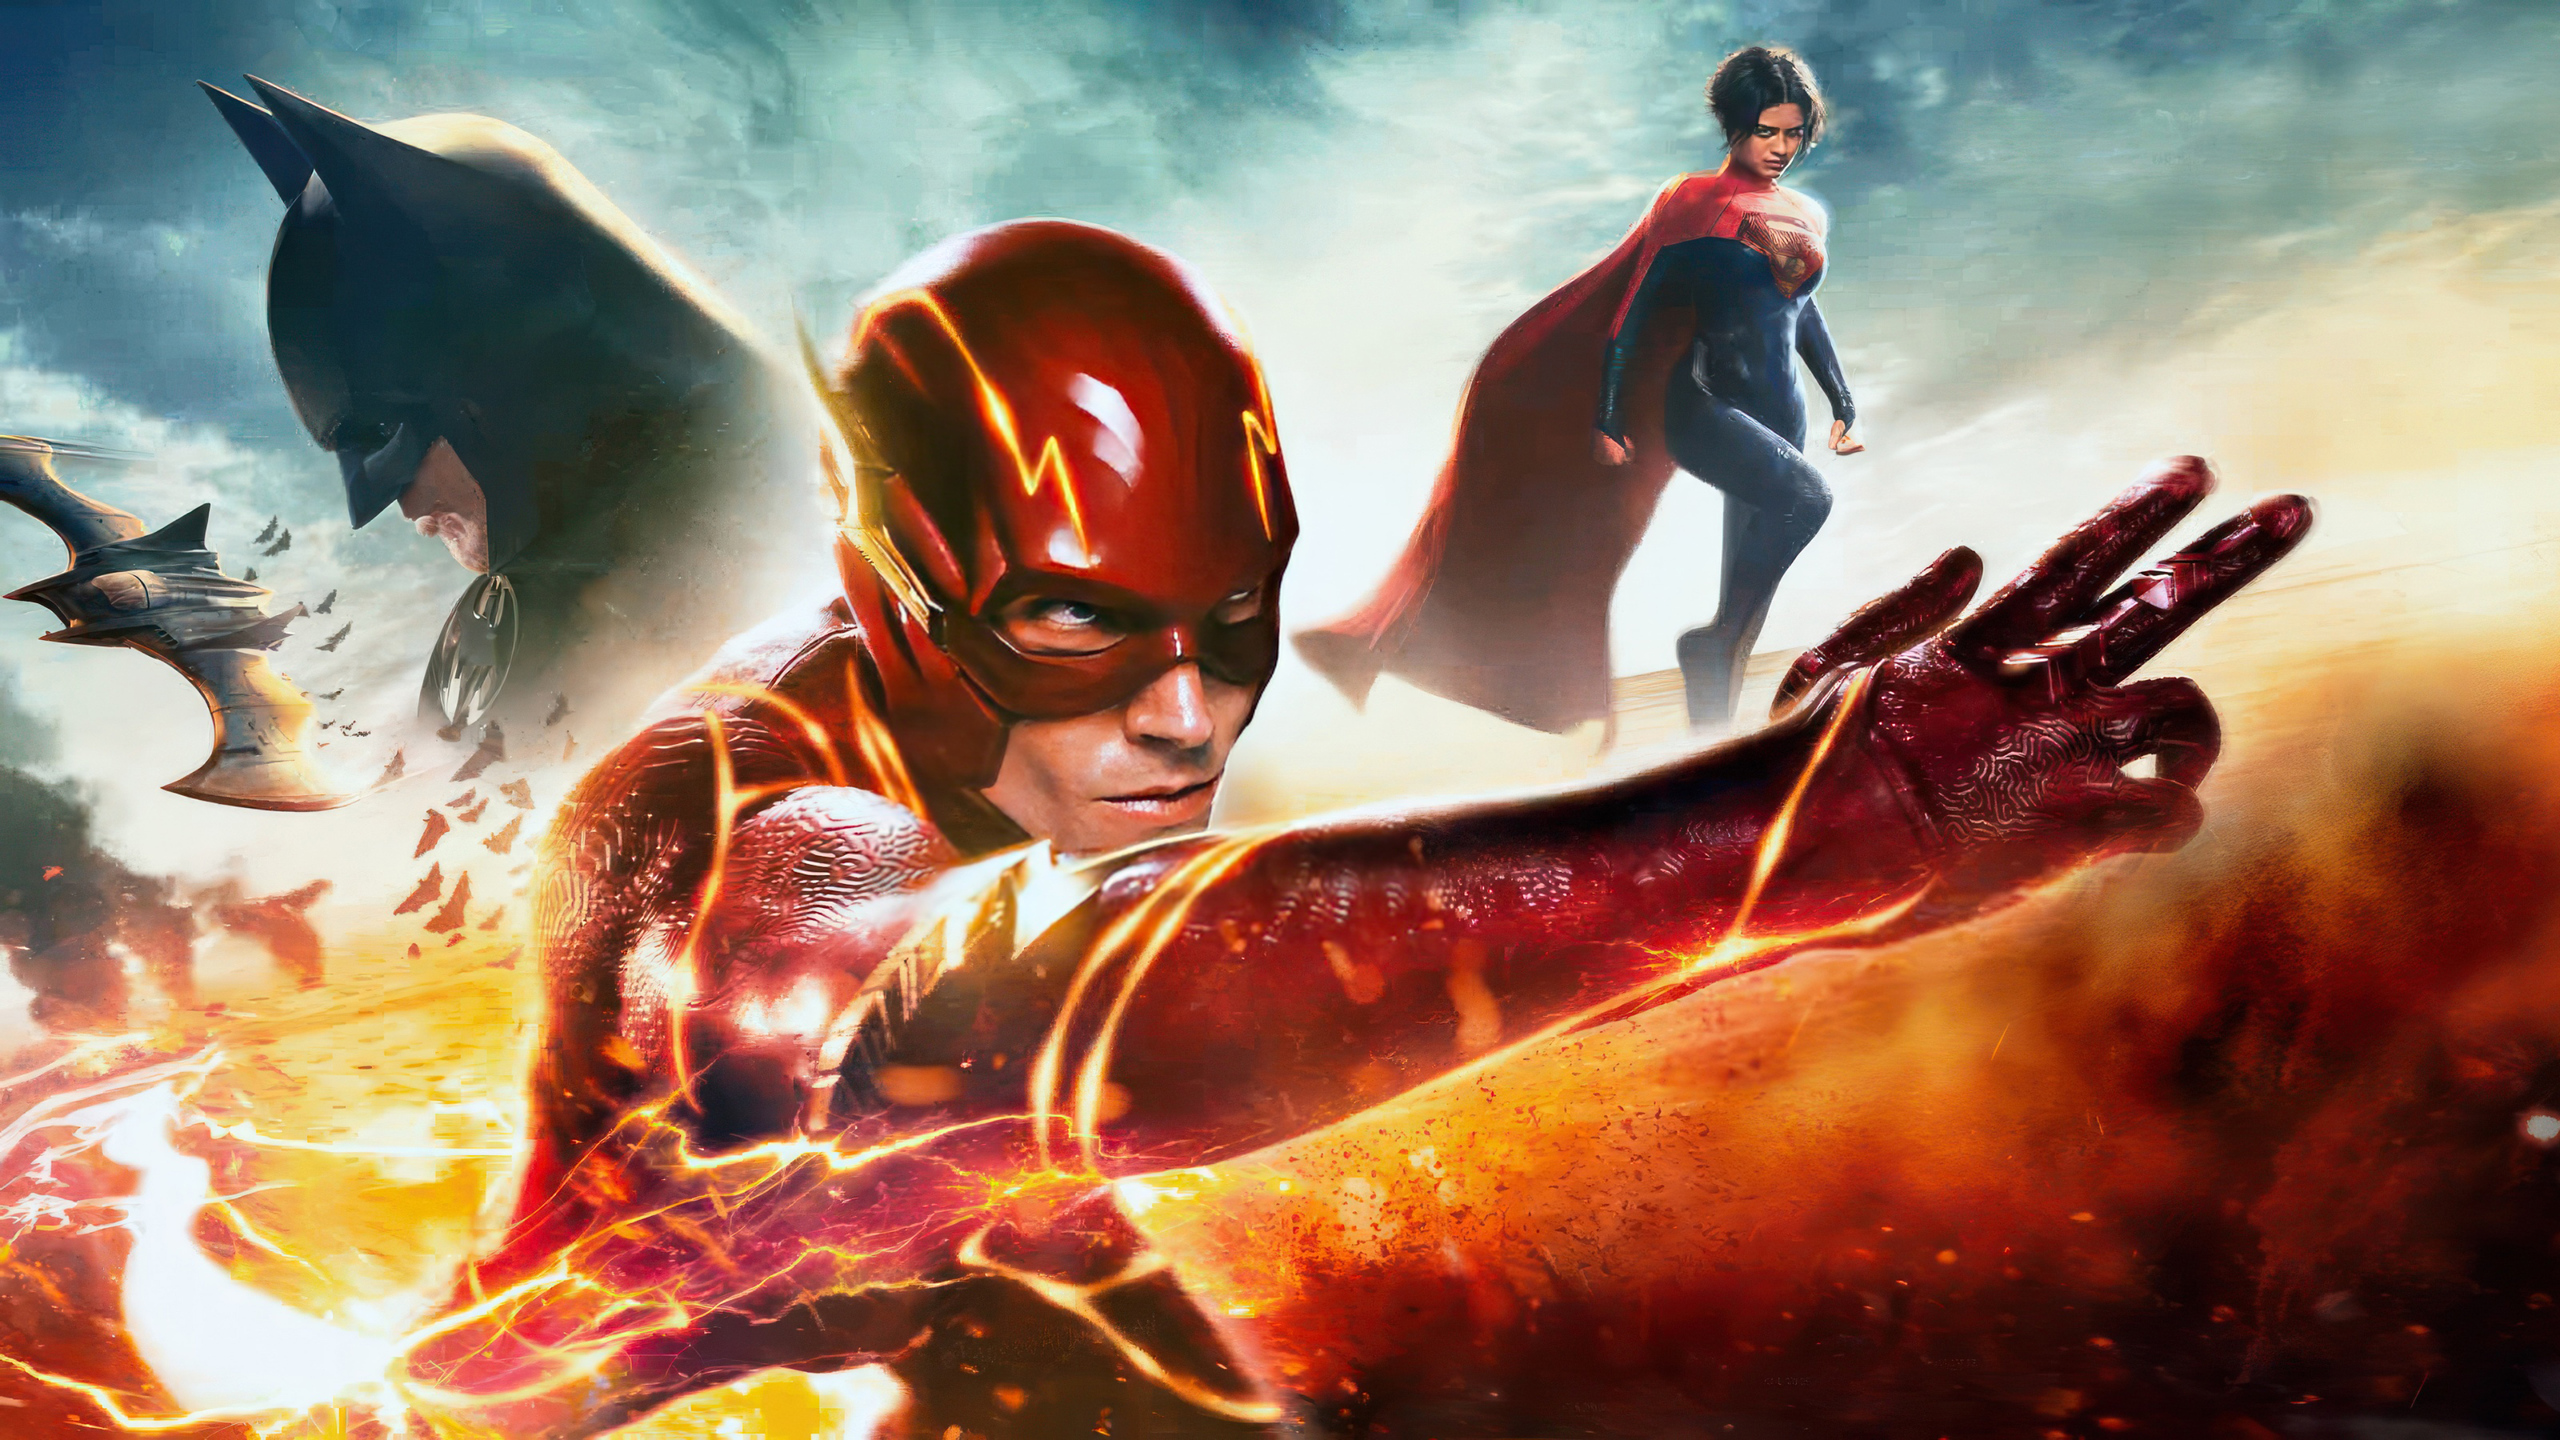 Should We Cancel ’The Flash’? Or did ’The Flash’ Cancel Itself?